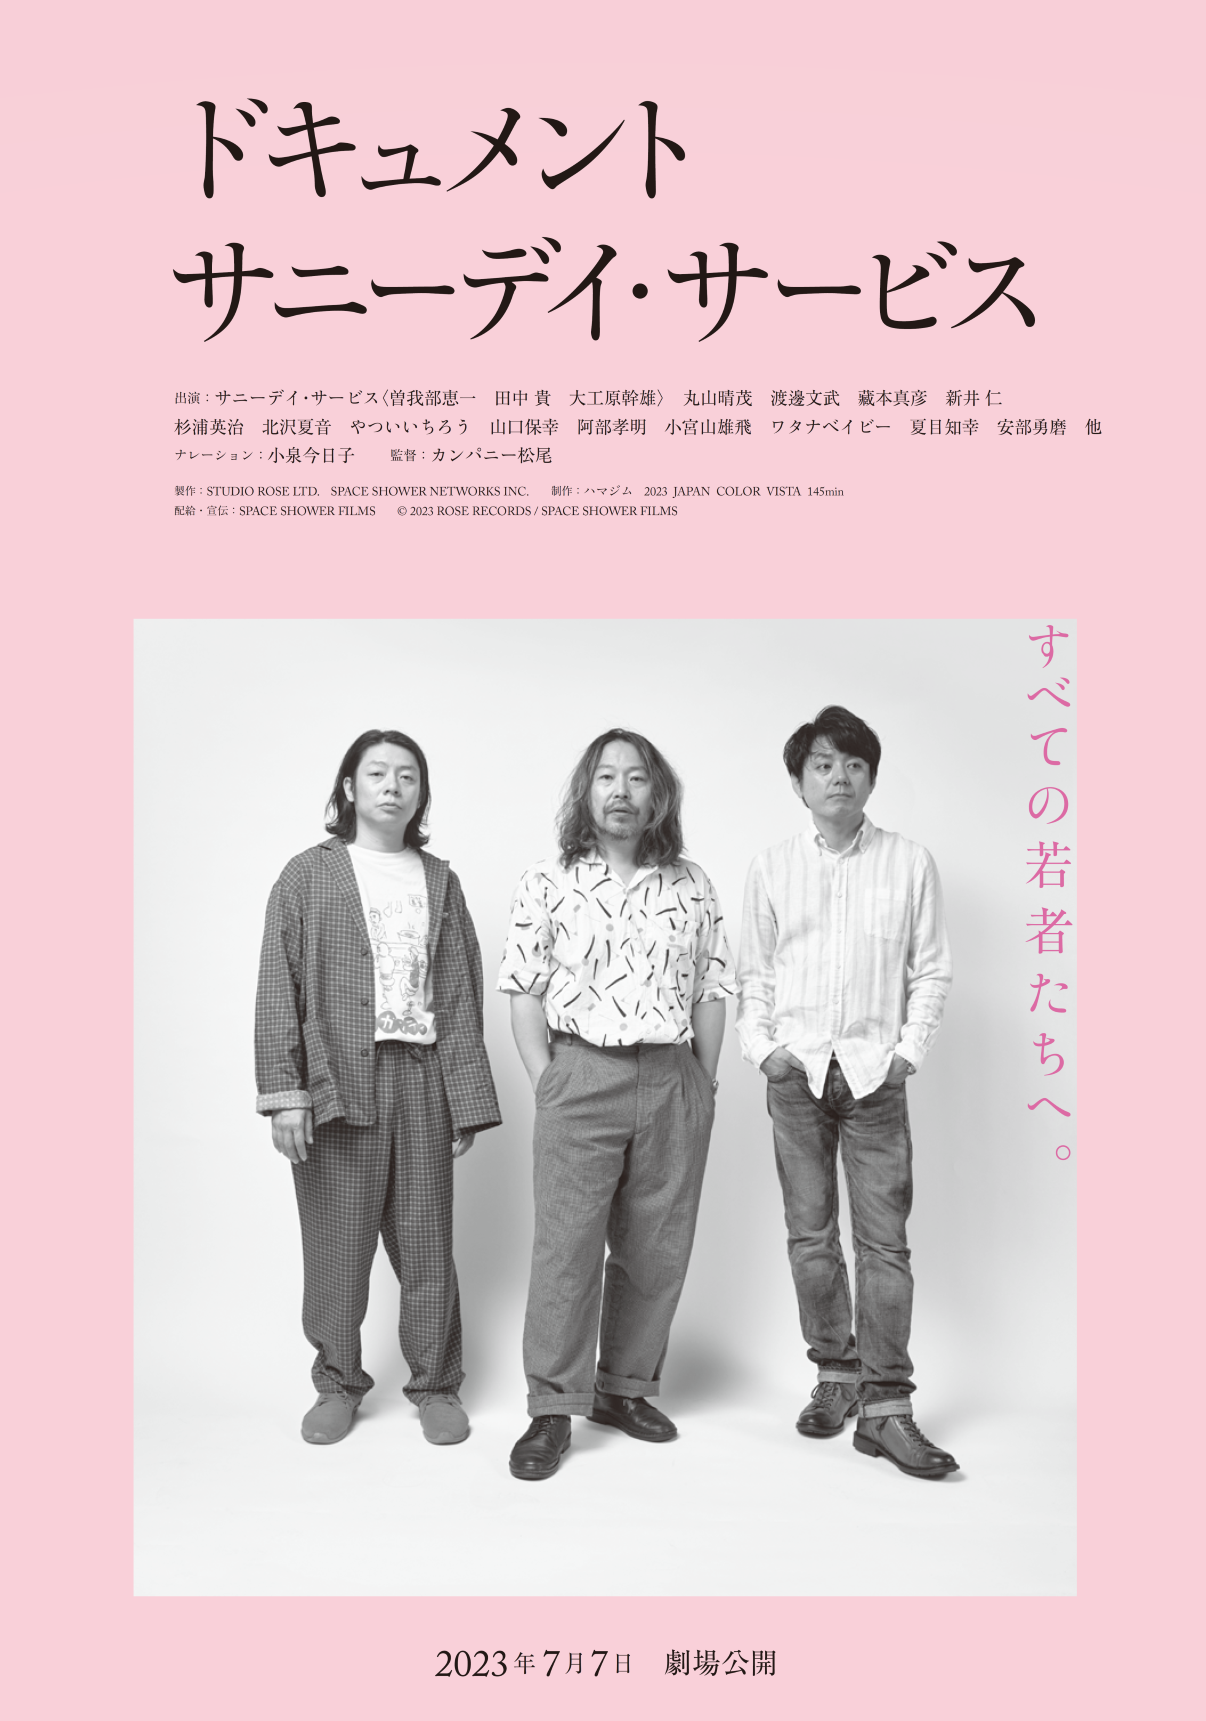 http://rose-records.jp/files/20230223143848.png